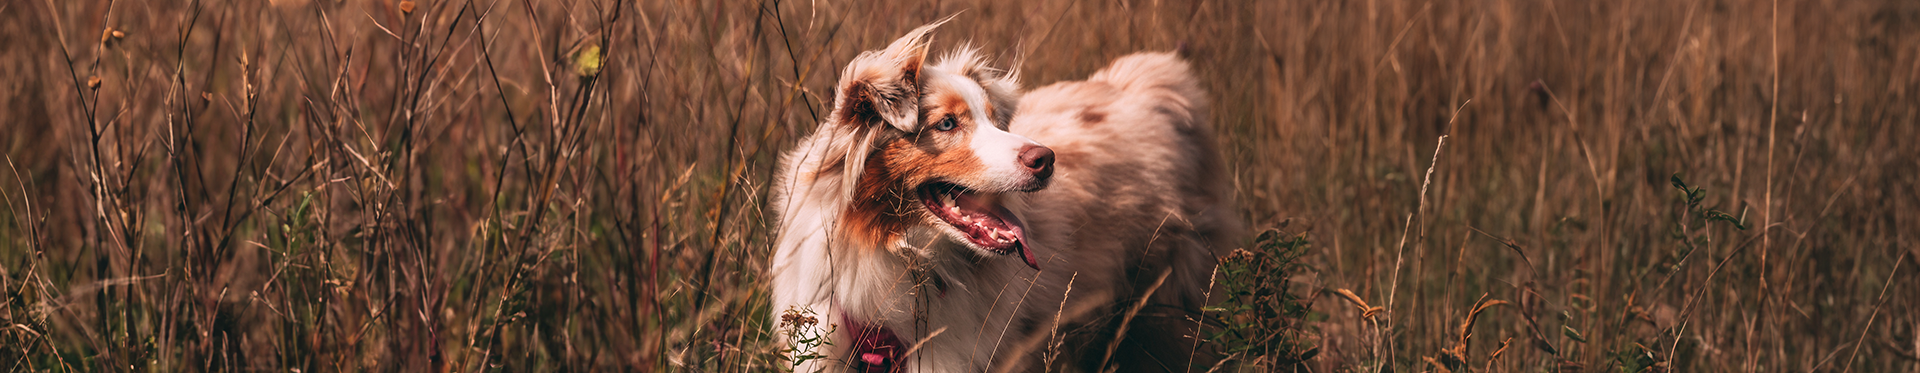 Dog looking off to the side while in a field of tall brown grass